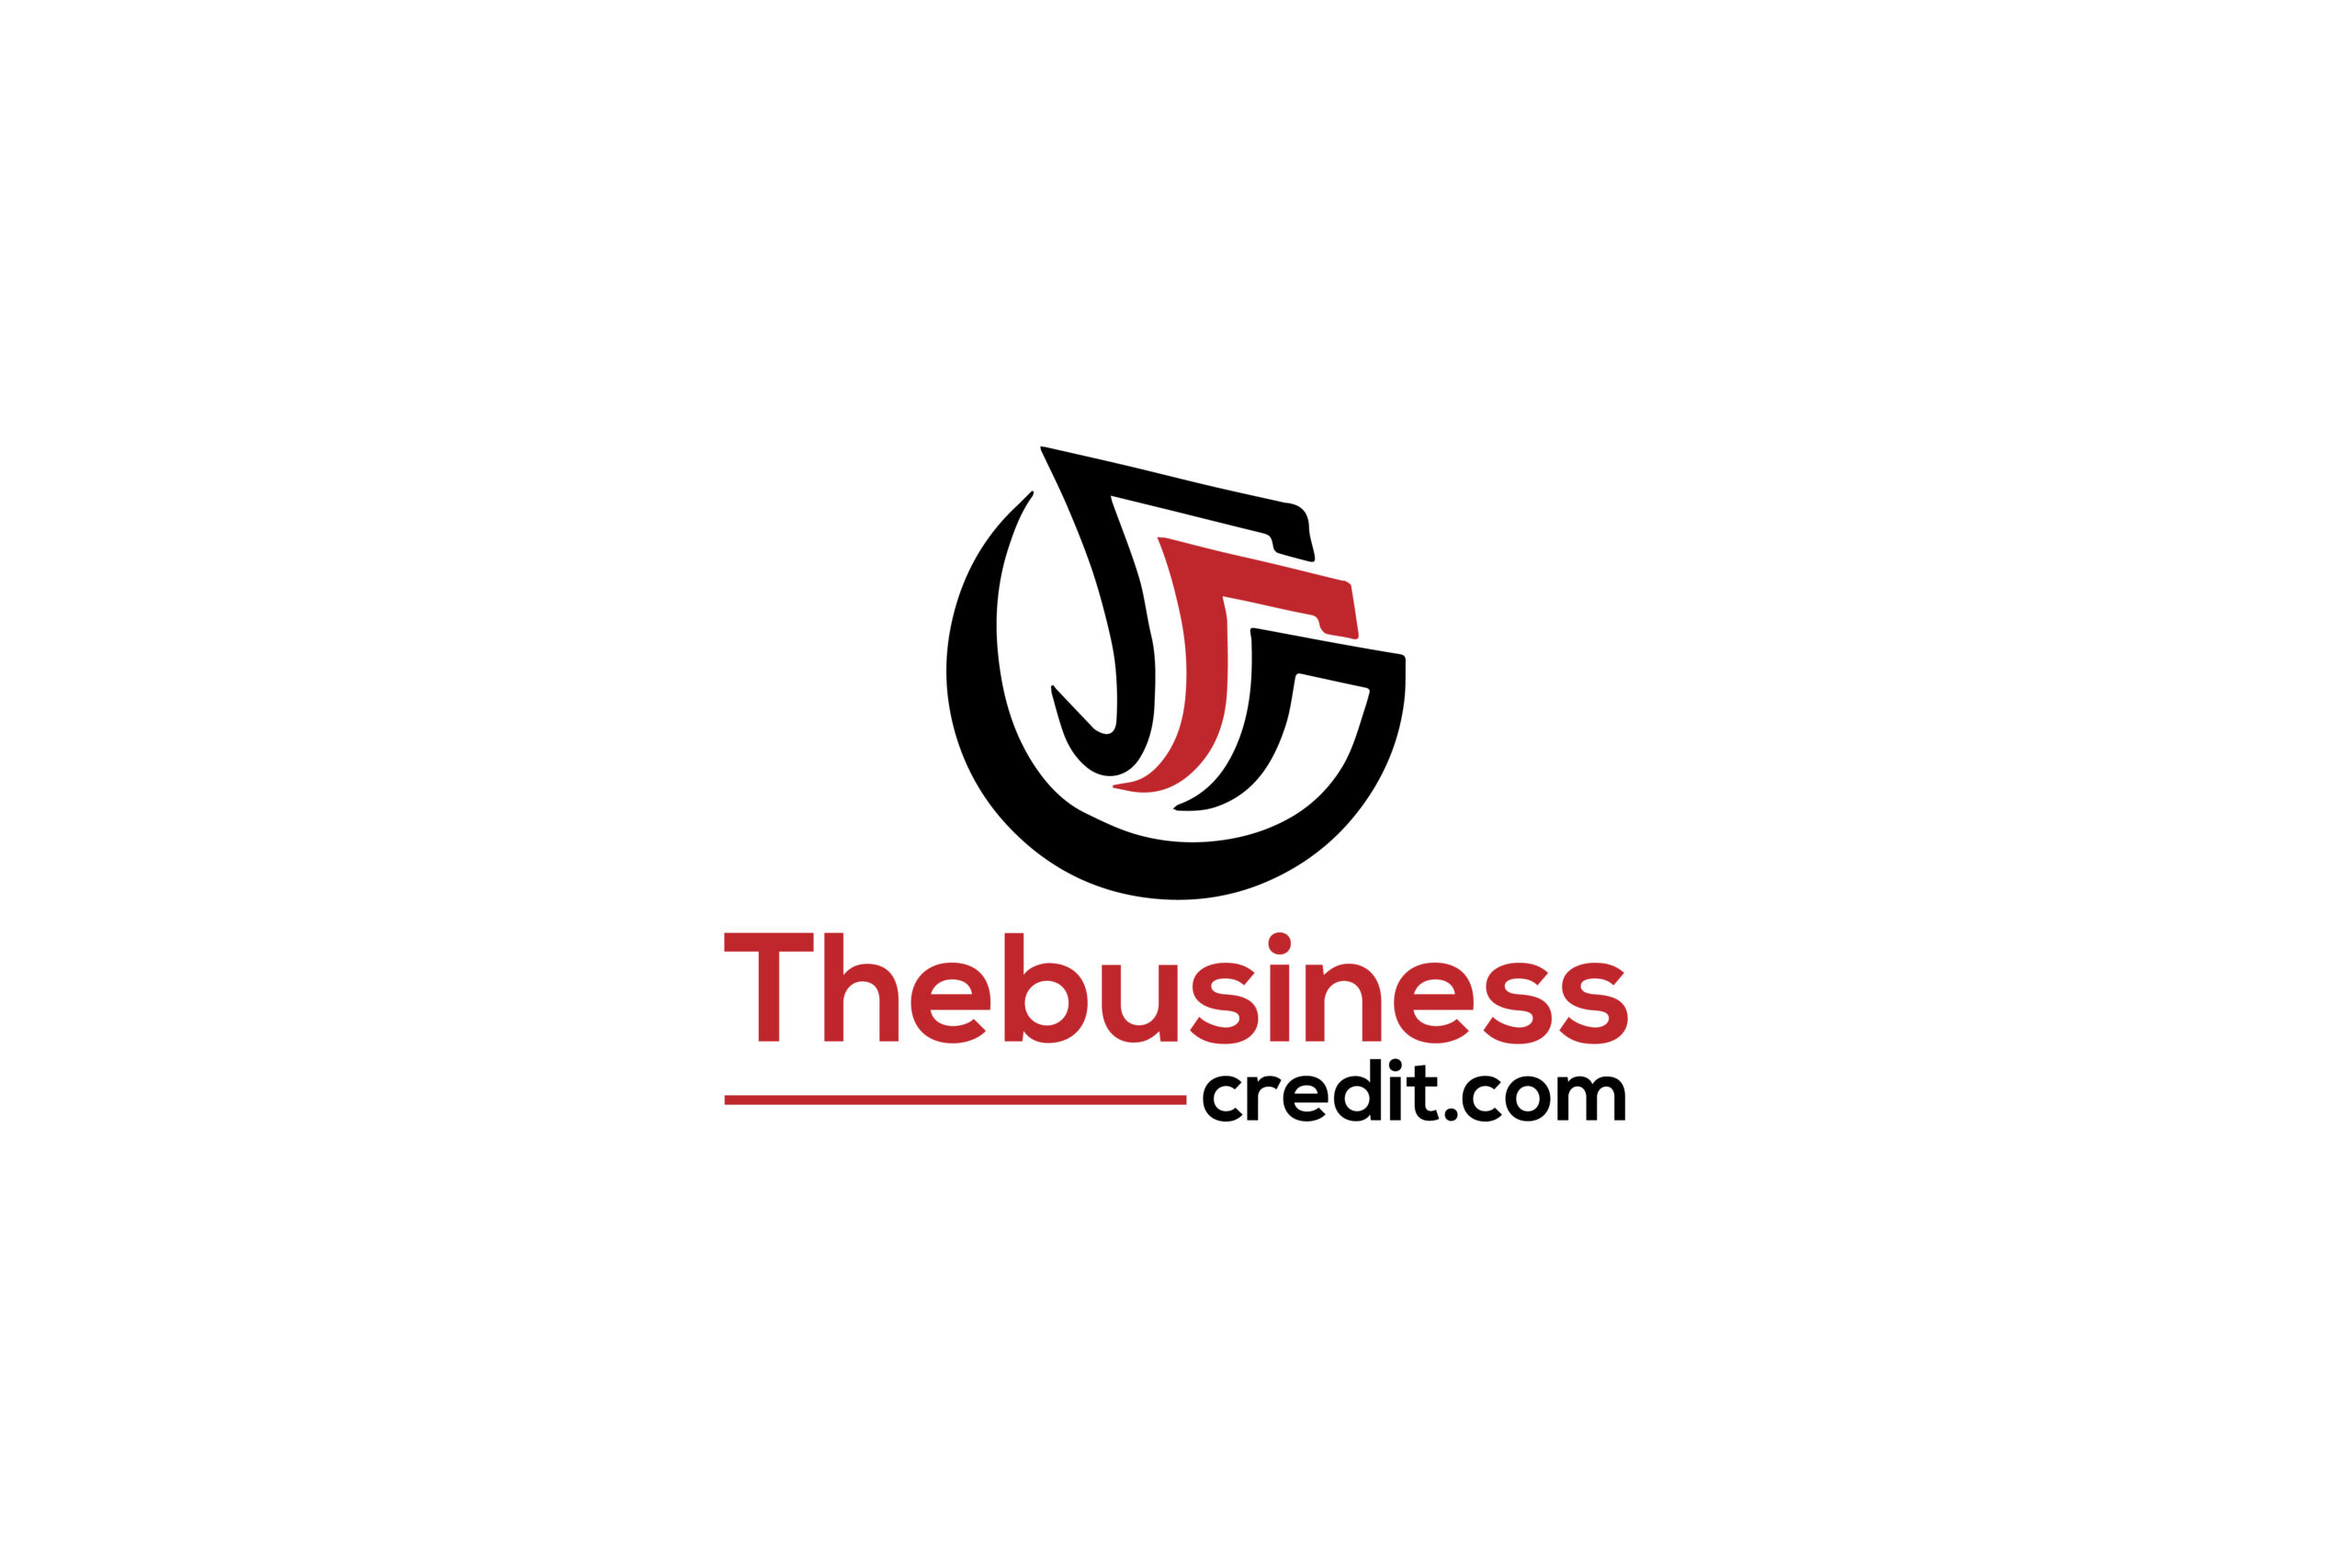 The business credit